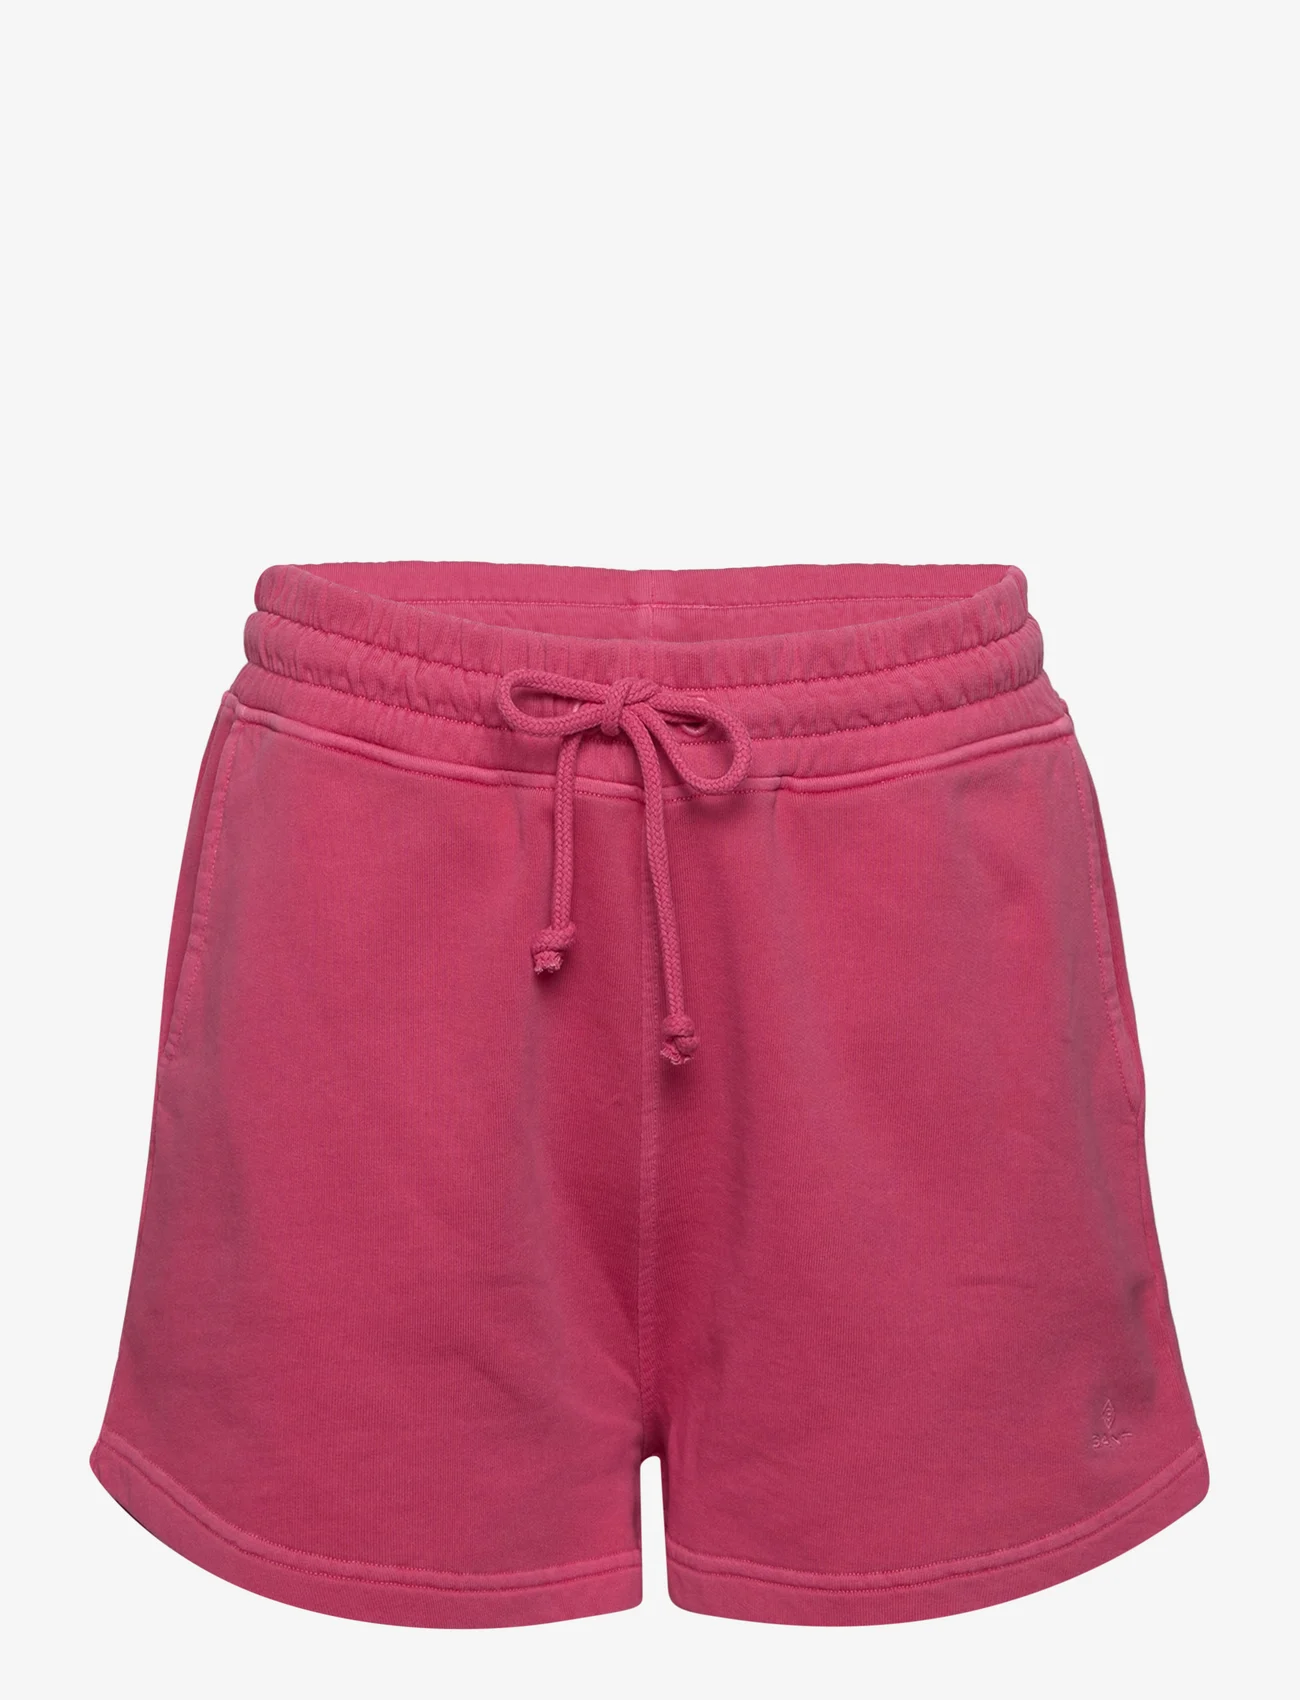 GANT - RELAXED SUNFADED SHORTS - casual szorty - magenta pink - 0